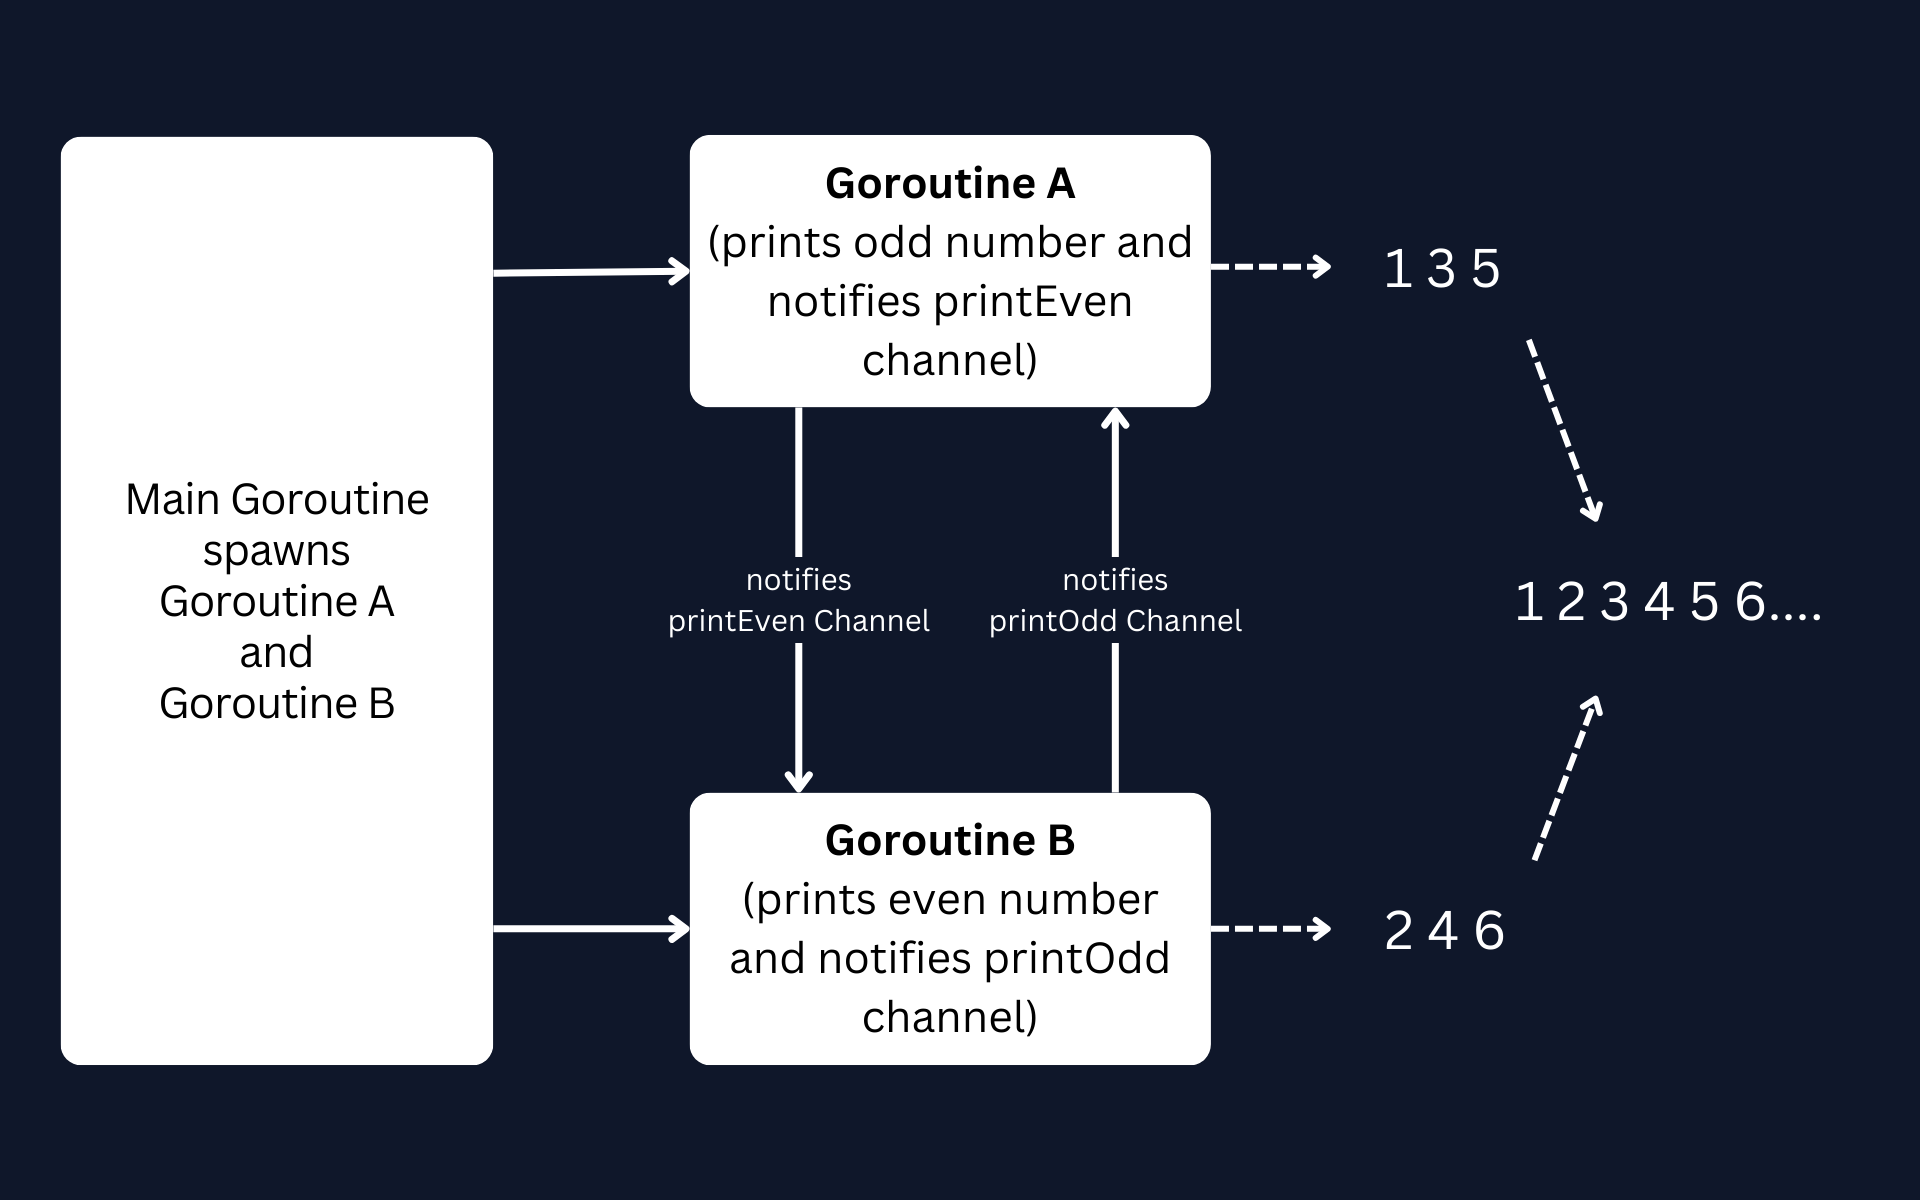 Communication between the two Goroutines using channels